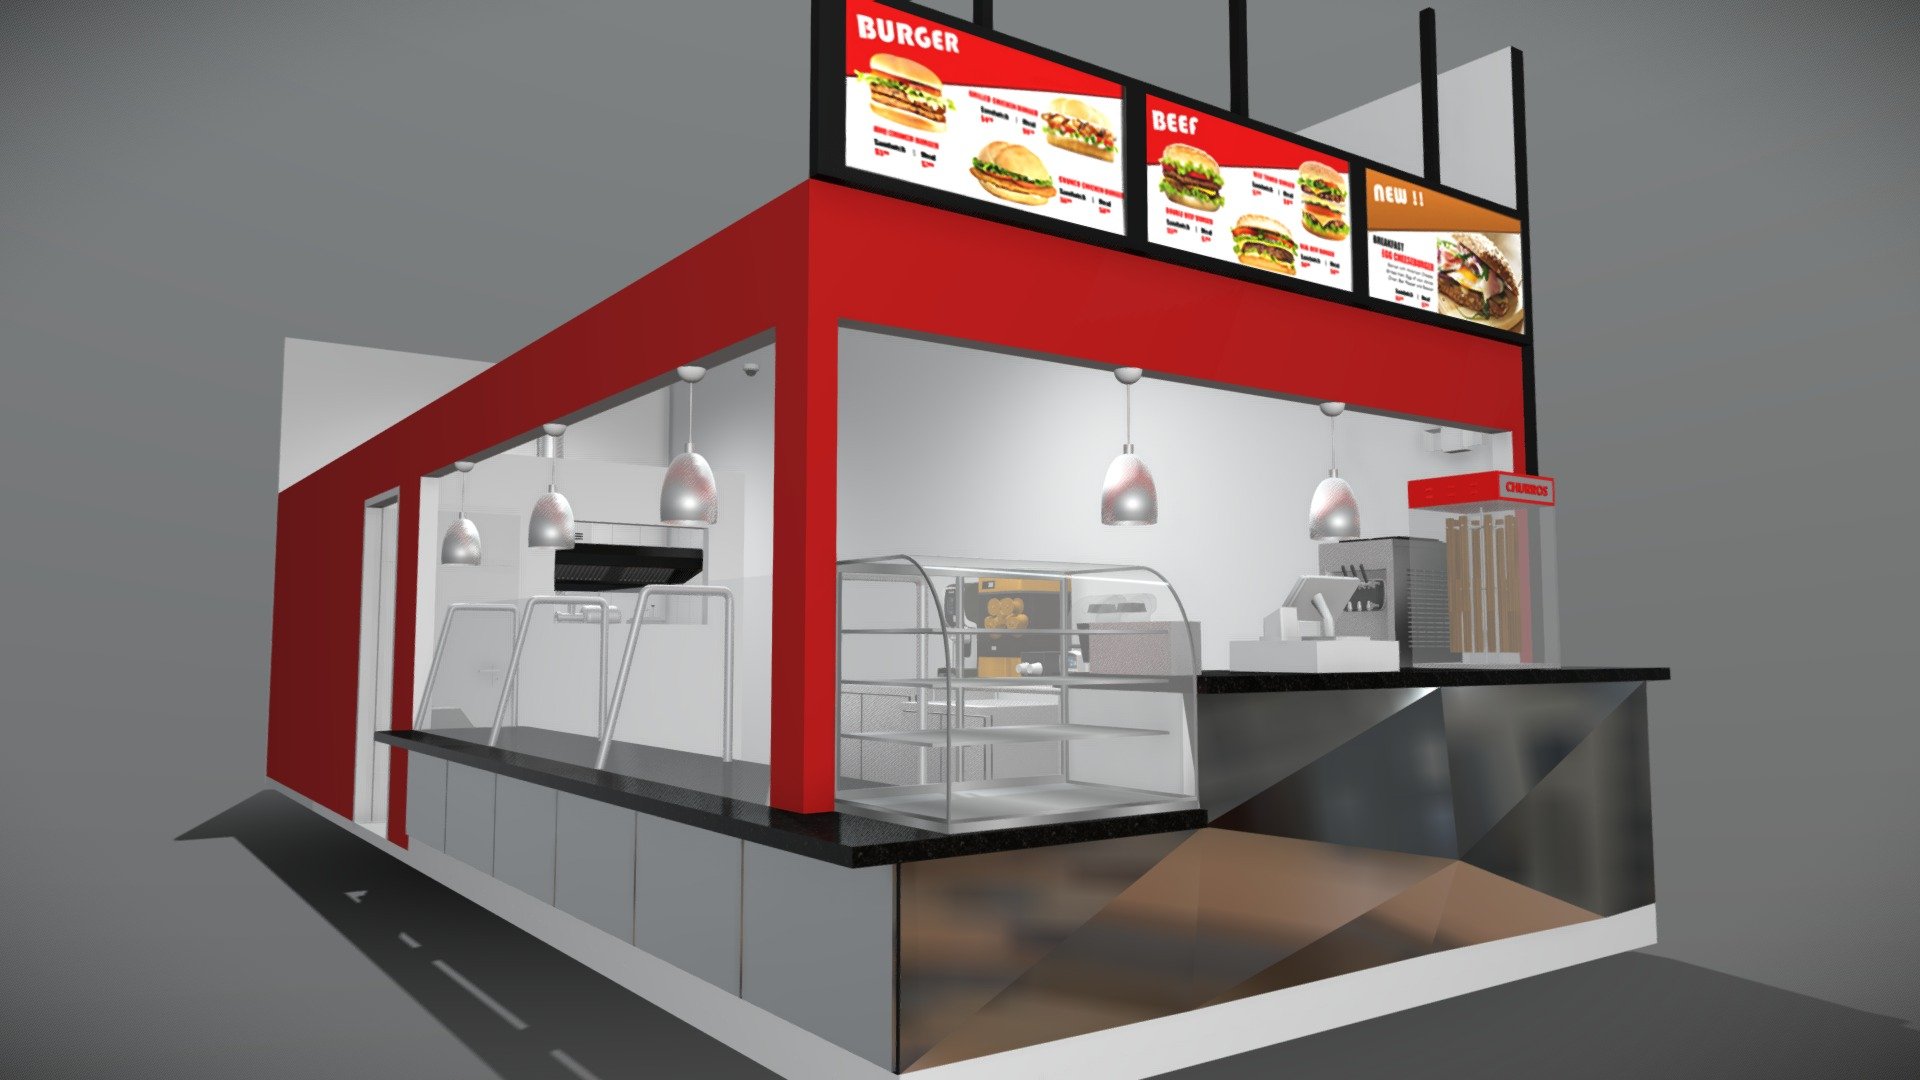 Design for A&amp;C Capital Investment

Design by: Reinald Febrian - Kitchen for Main St Chimi Burgers - 3D model by ancmarketingpartner 3d model